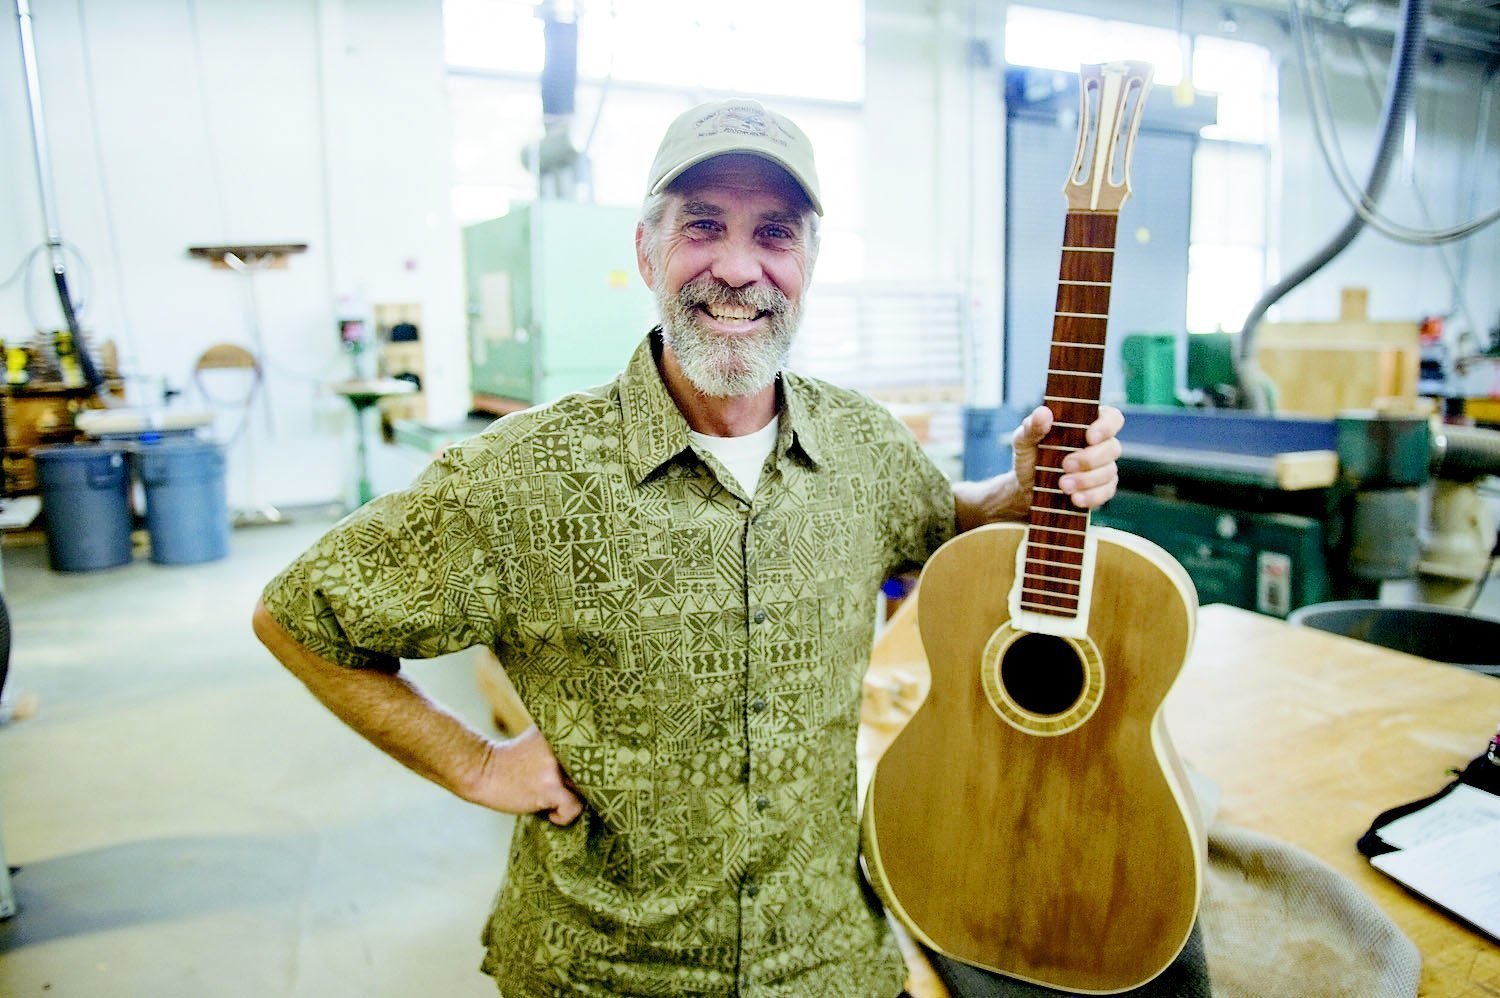 Palomar woodworking guru builds on in-house legacy - The 